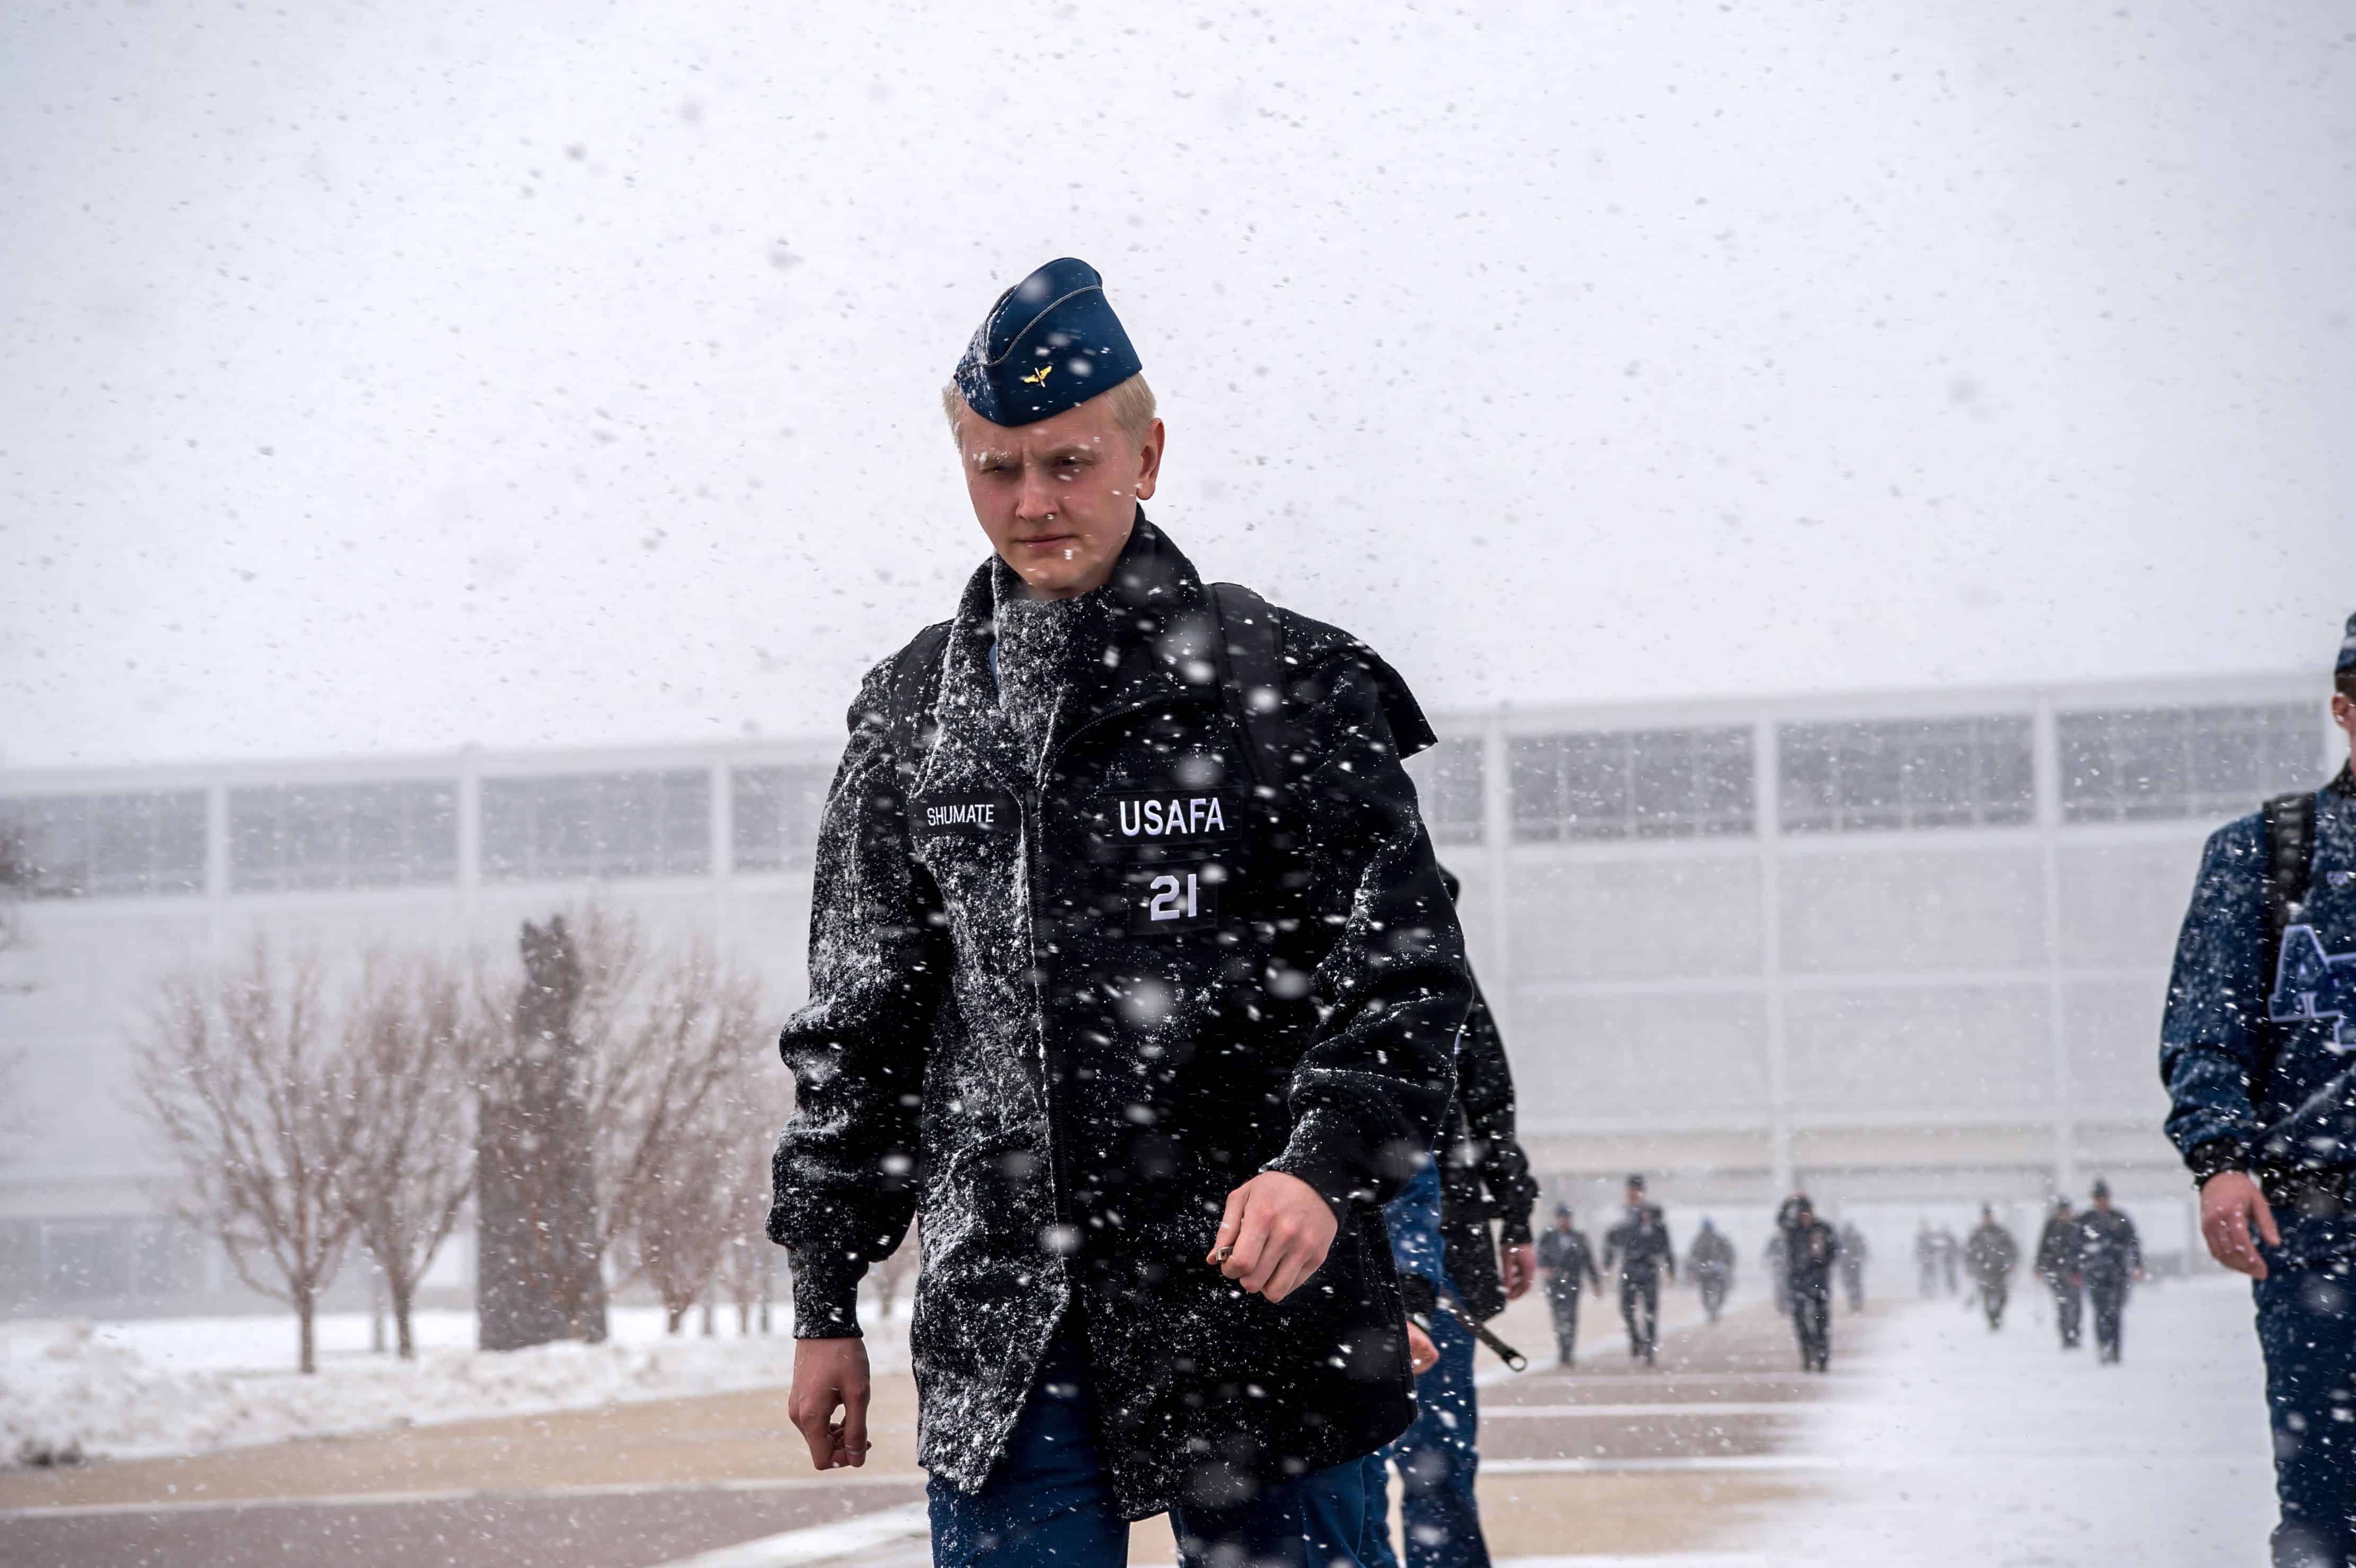 U.S. AIR FORCE ACADEMY, Colo. – Cadets cross the Terrazzo braving winter weather caused by a sudden snow squall on Feb. 24, 2020 at the U.S. Air Force Academy. (U.S. Air Force photo/Trevor Cokley)